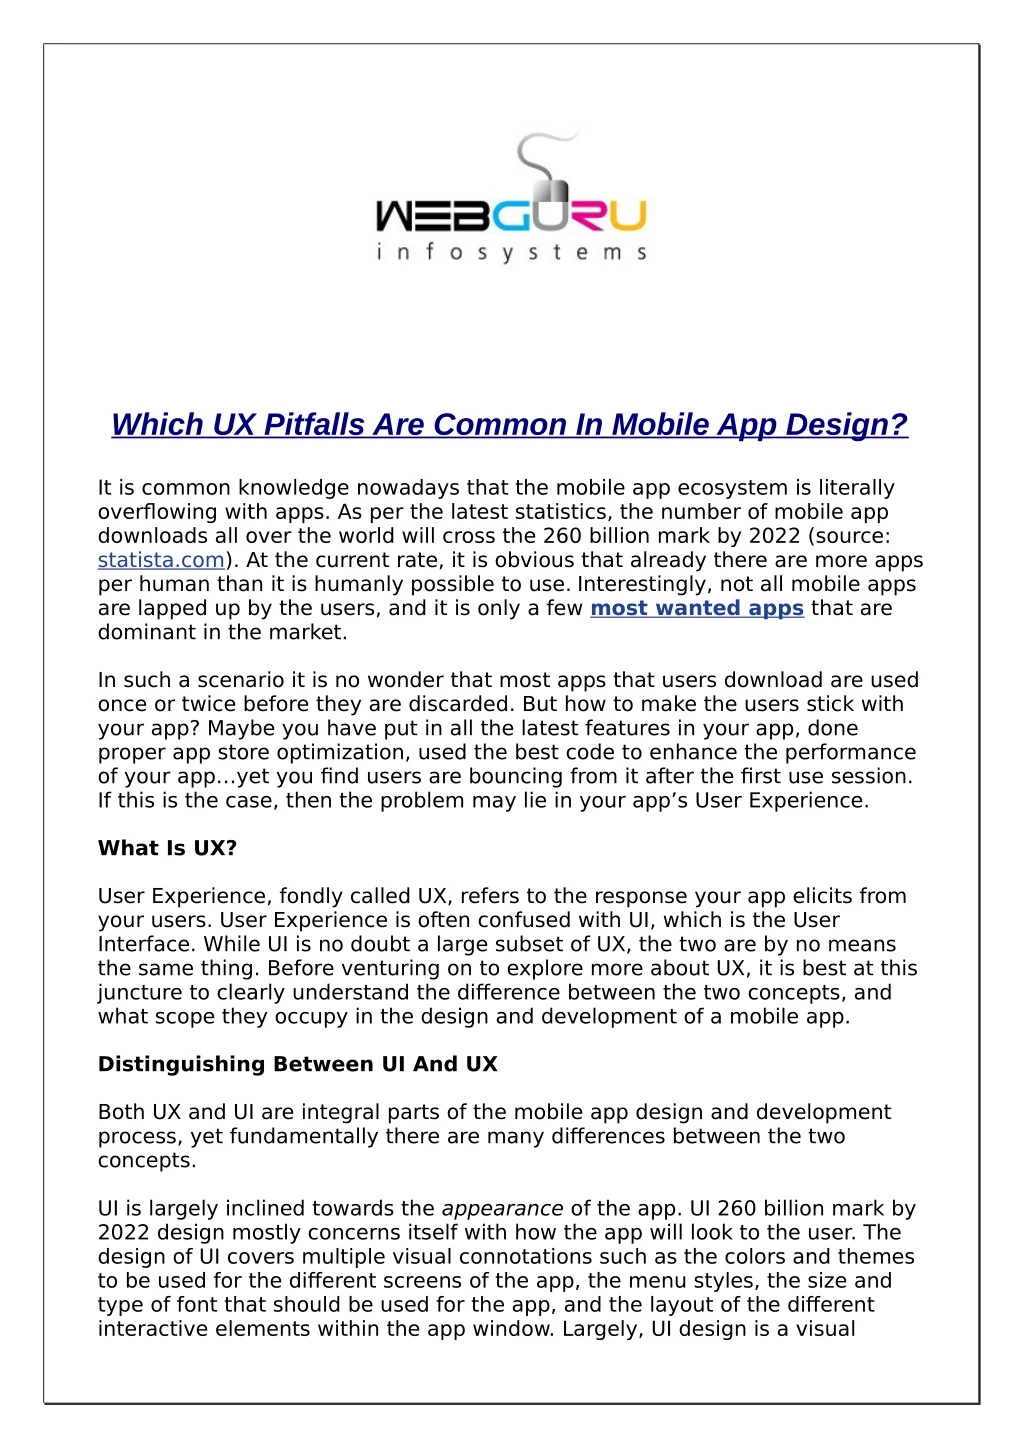 which ux pitfalls are common in mobile app design